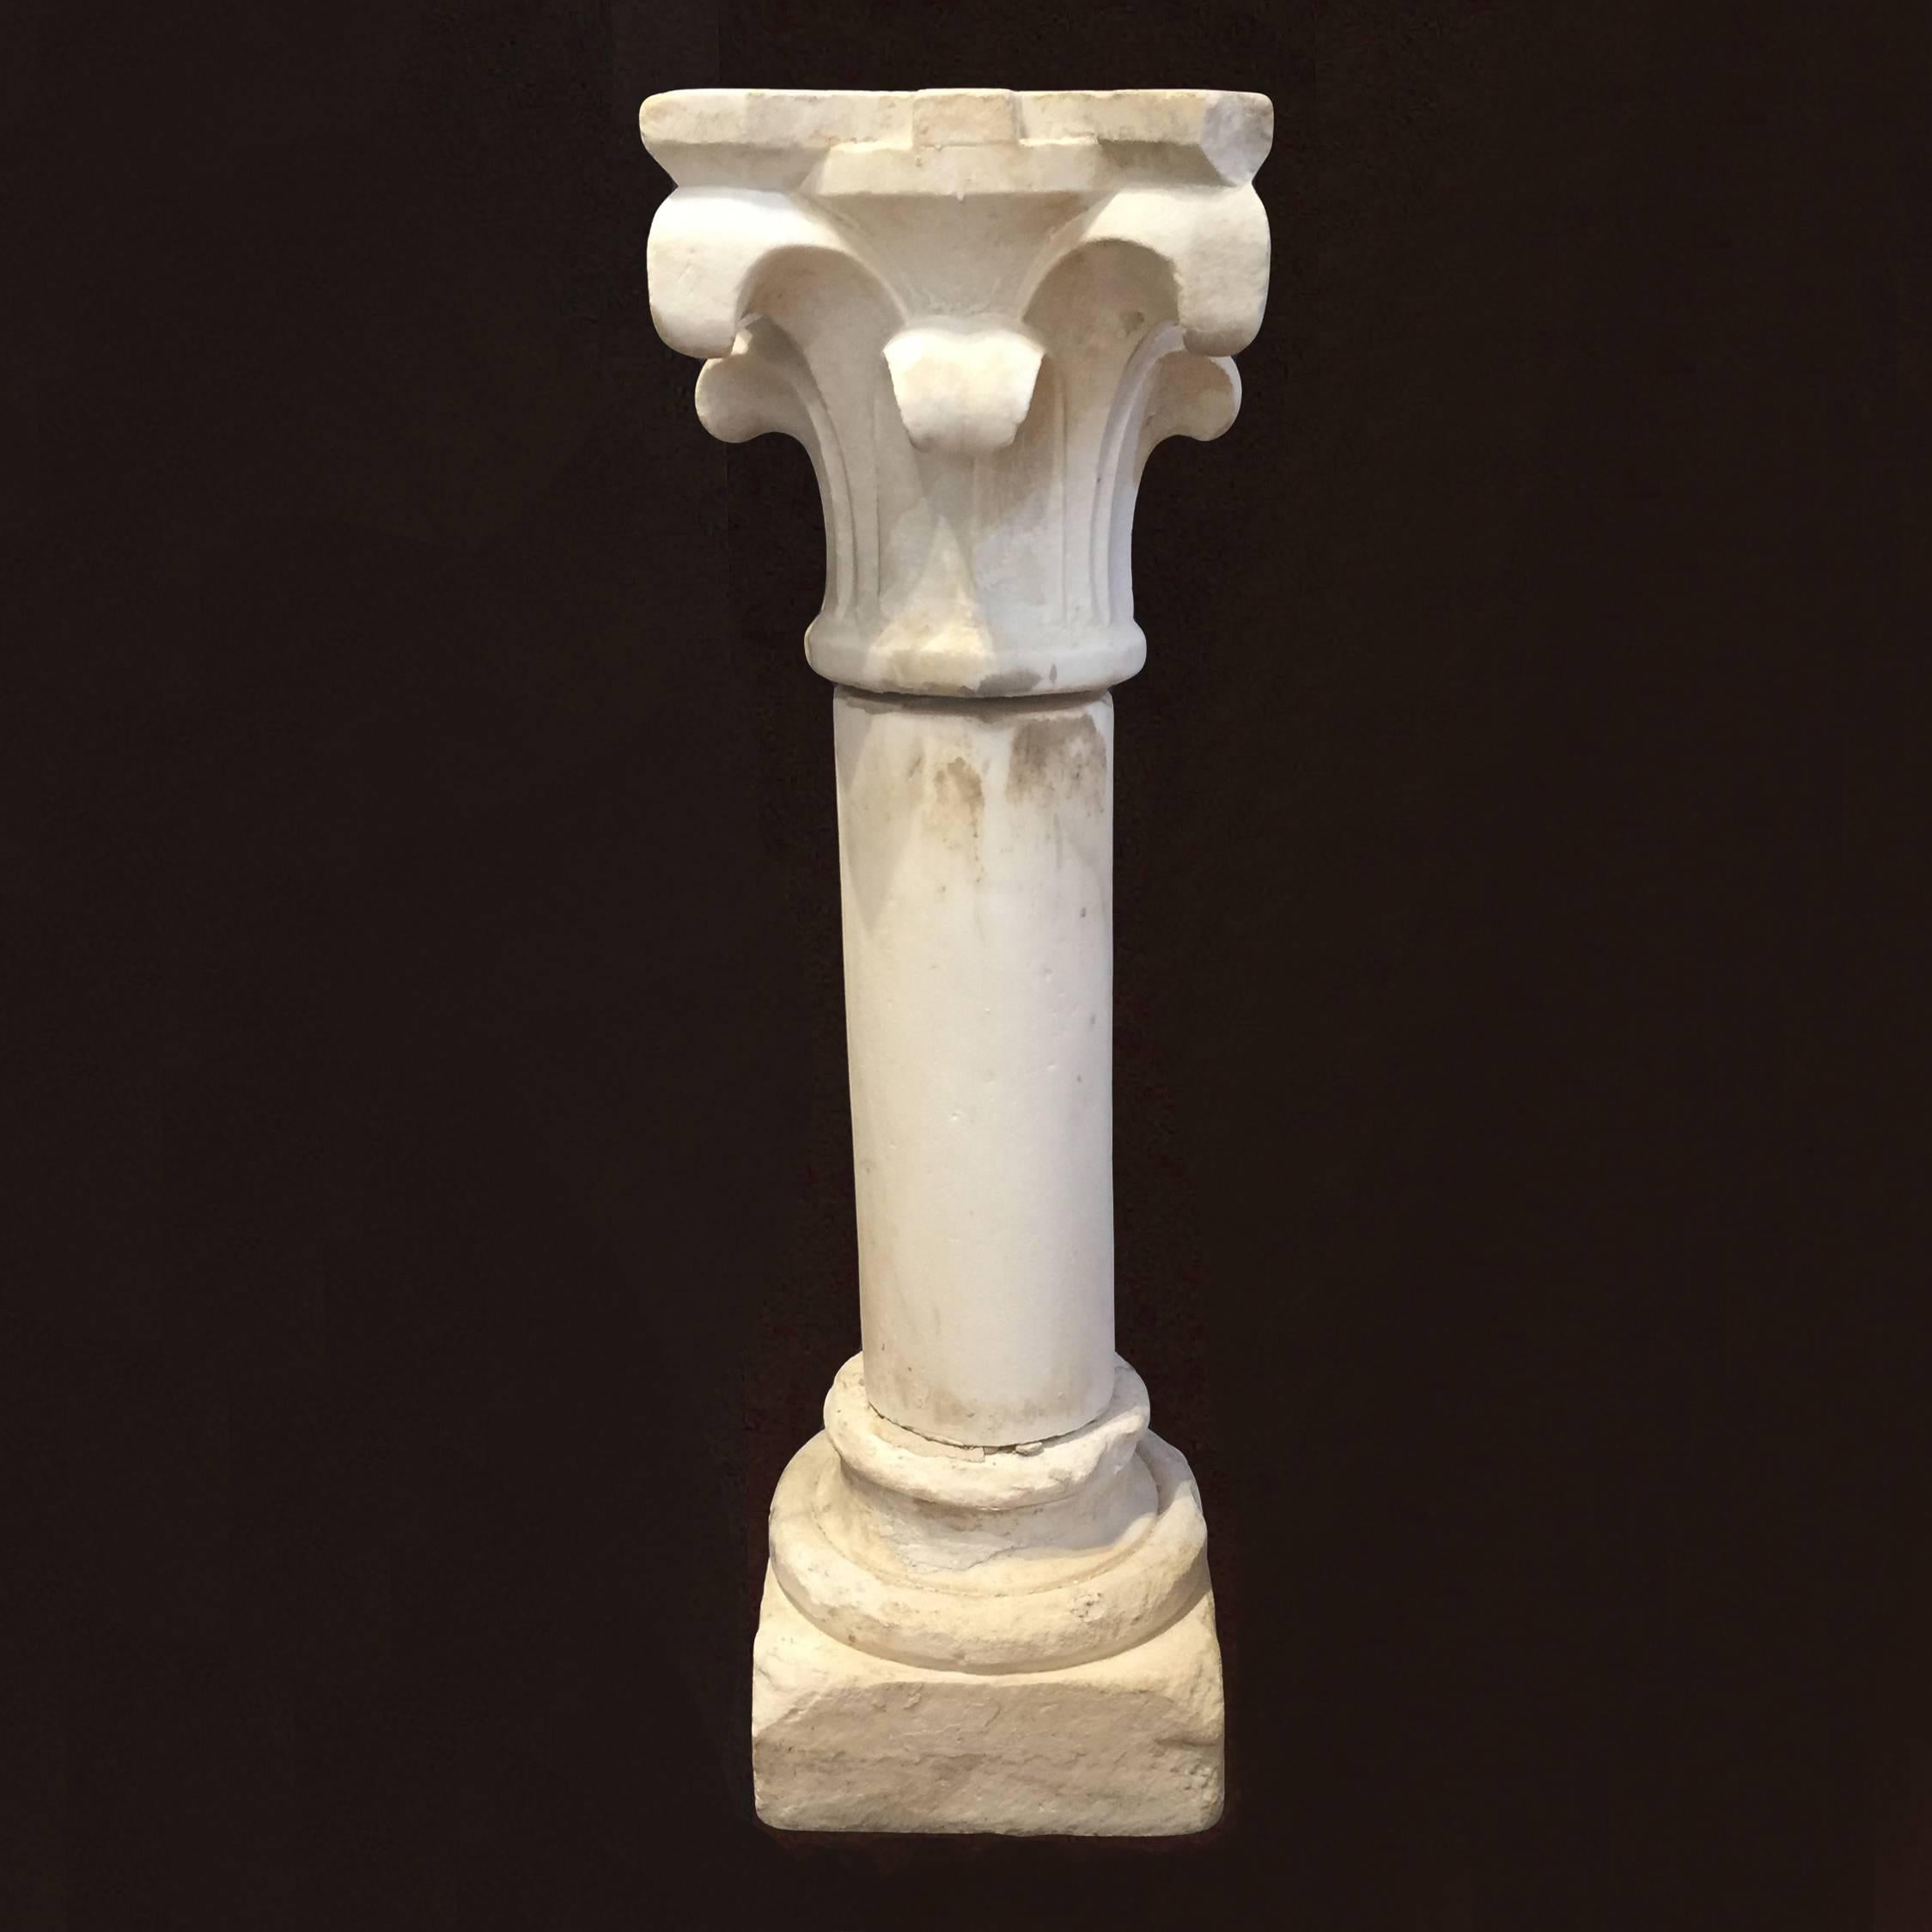 A charming three-piece carved white marble column or pedestal with Corinthian capital.
The single marble pieces are connected by a small iron structure.
Beautiful capital inspired by the antiques
Tuscany, late 18th Century
Perfect eye catcher